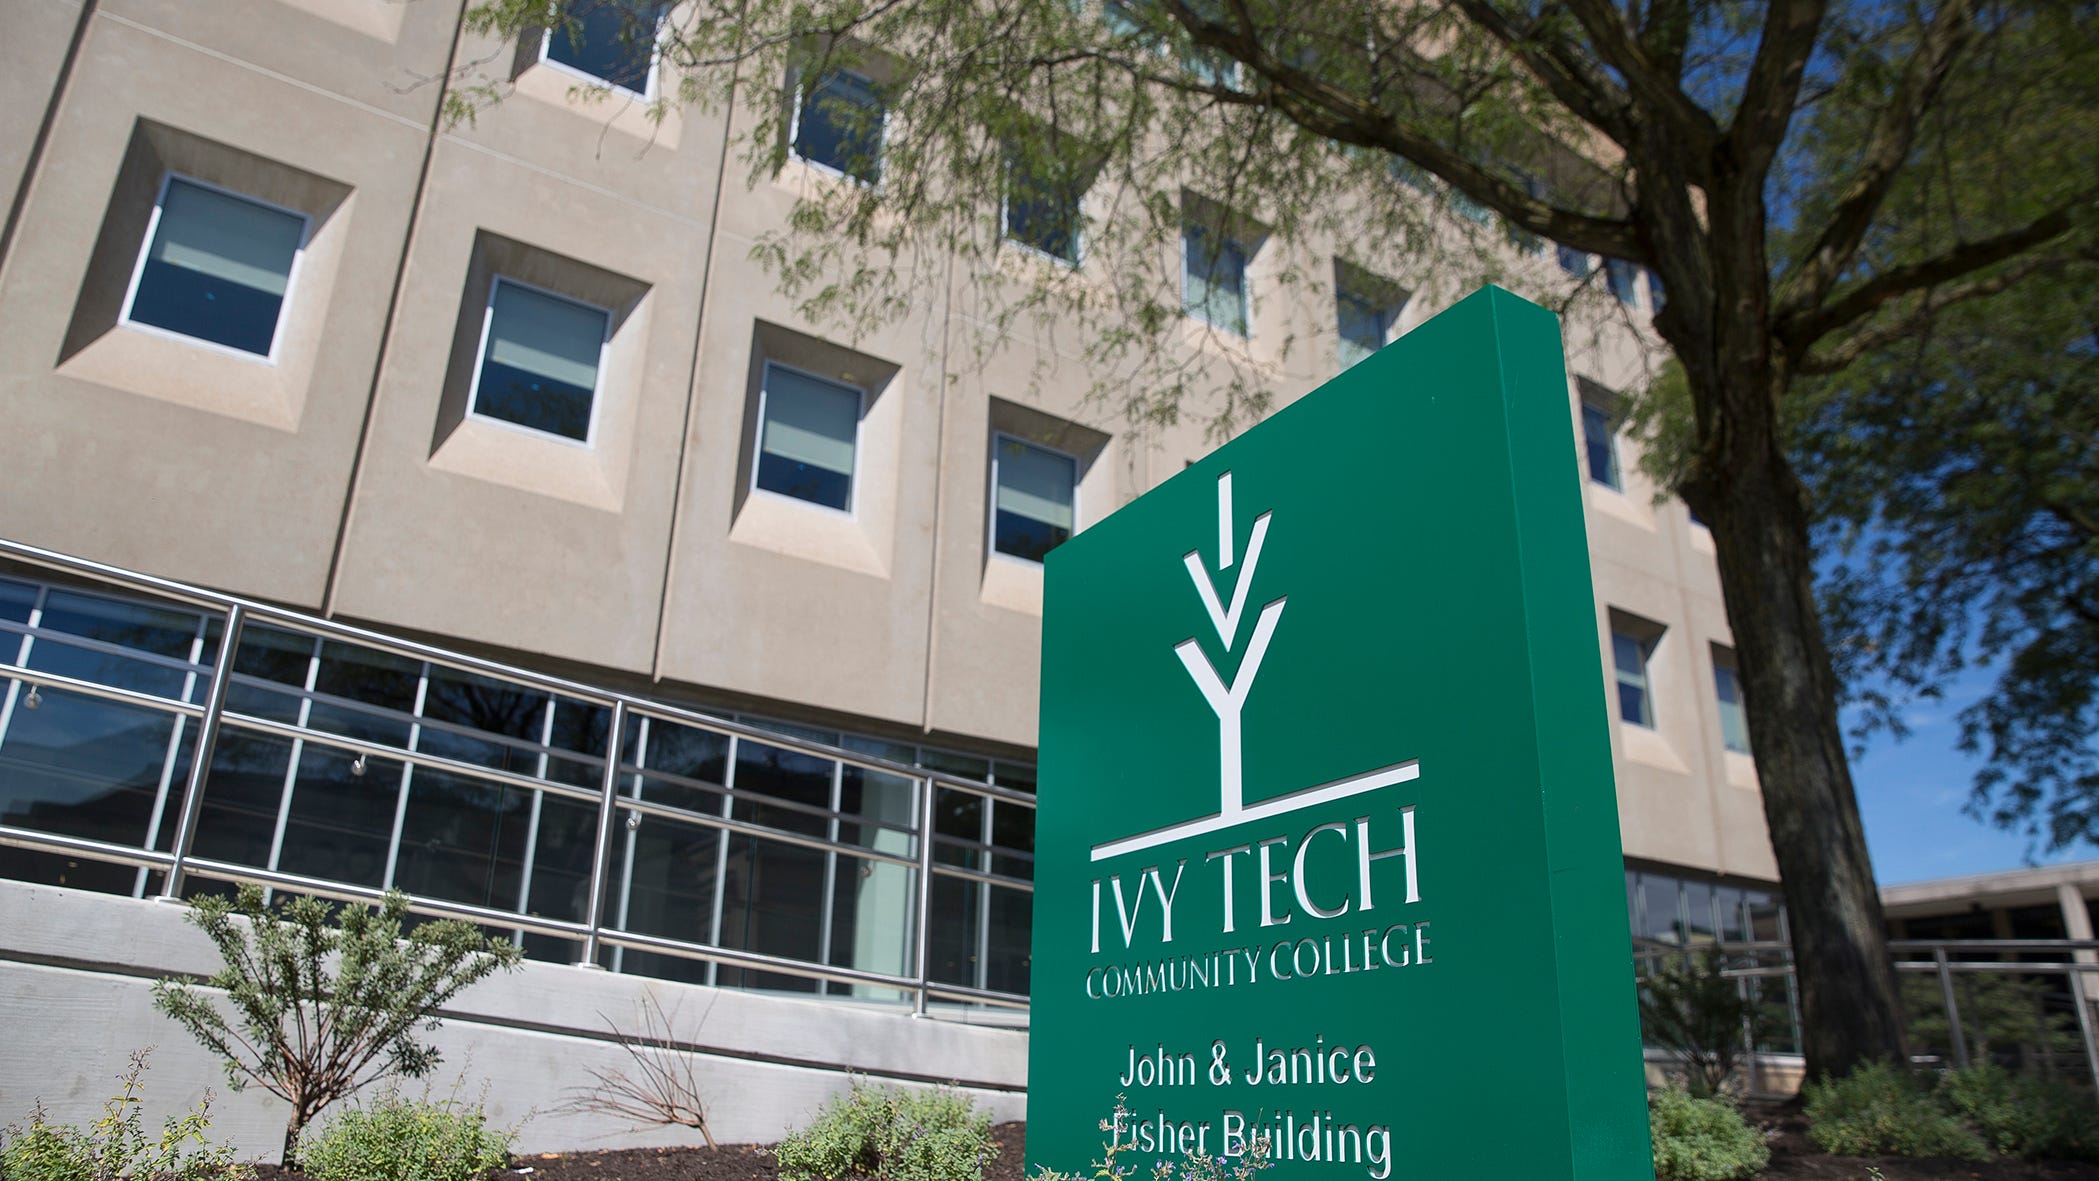 Ivy Tech starts semester with lower enrollment, 'learn anywhere' model